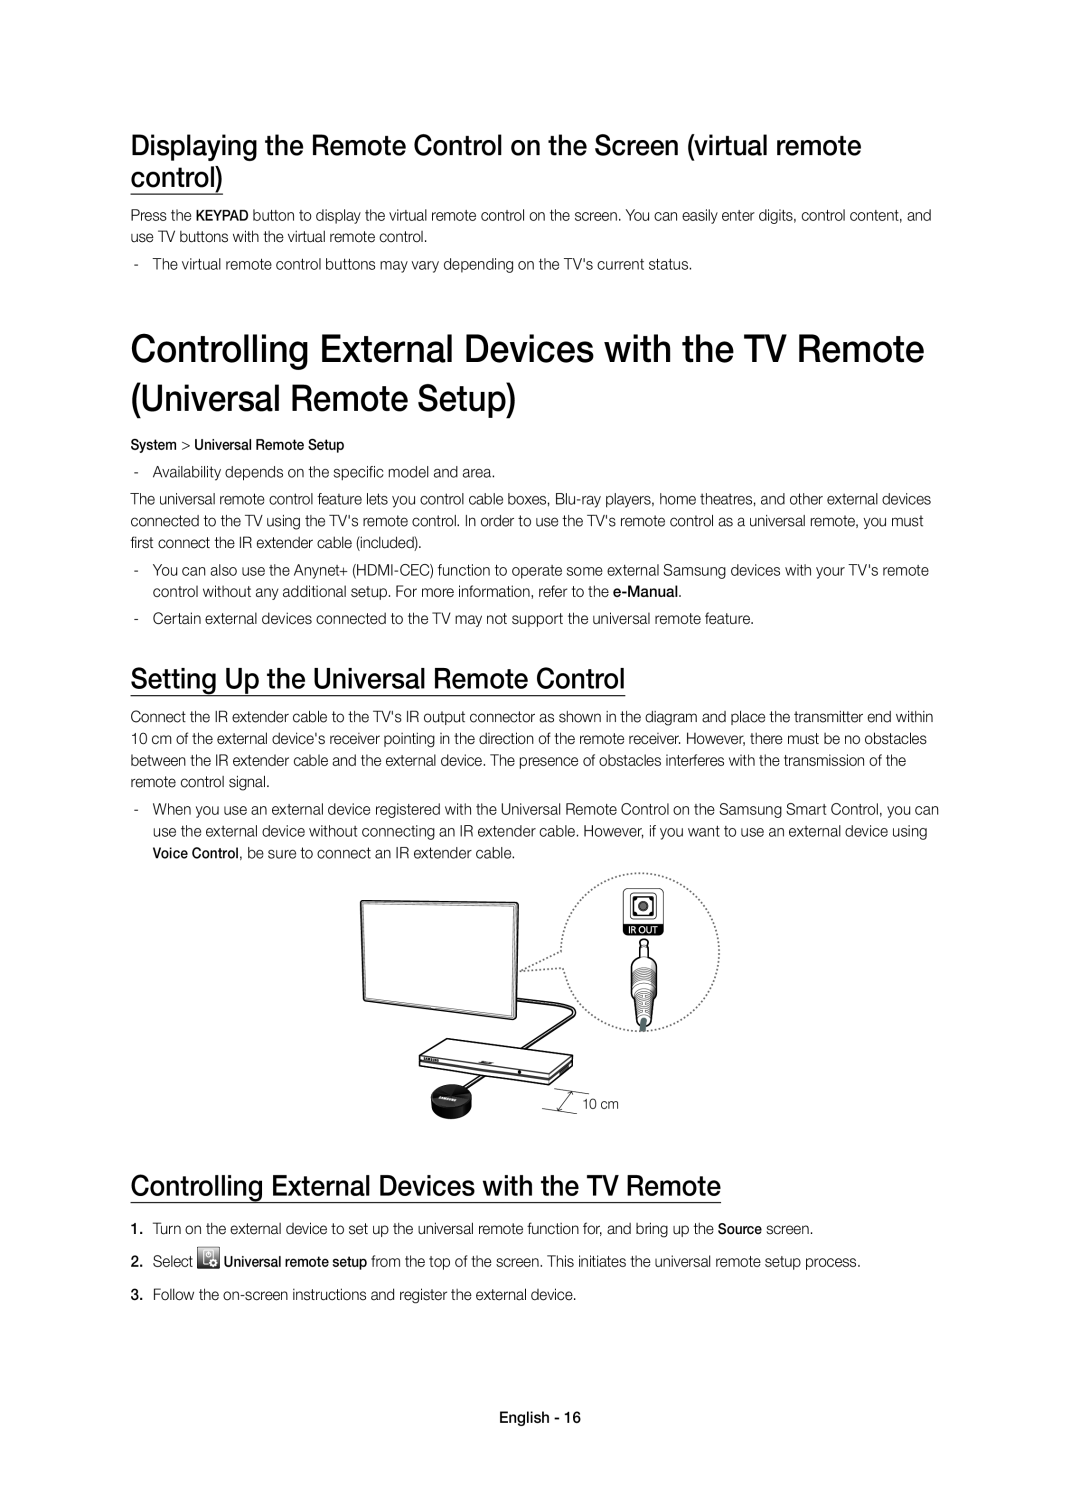 Samsung UE40H6410SSXXC Displaying the Remote Control on the Screen virtual remote control, System Universal Remote Setup 